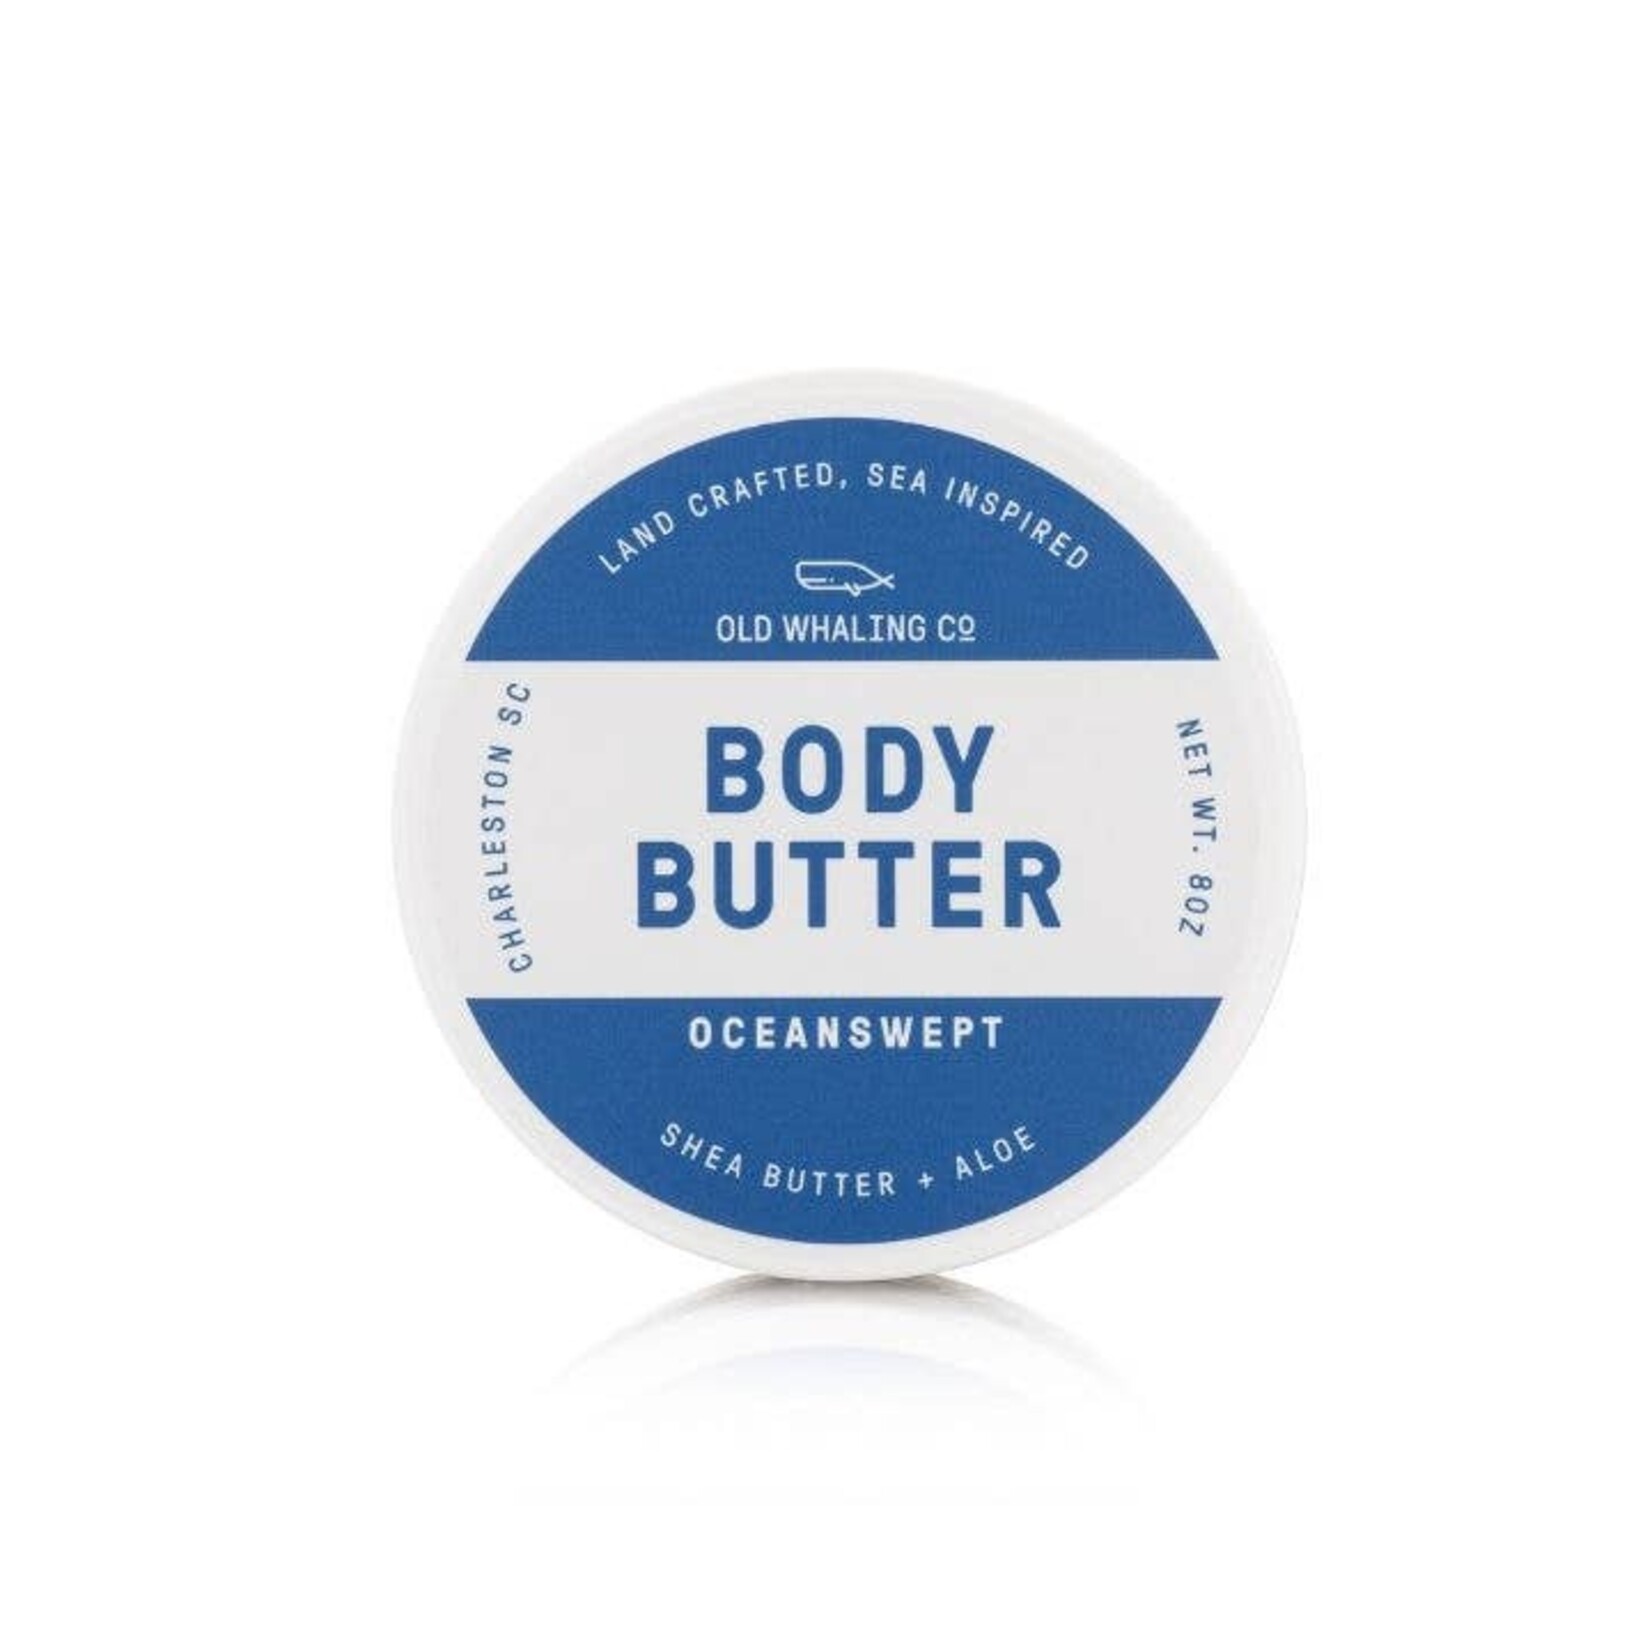 Old Whaling Company Oceanswept Body Butter (8oz)